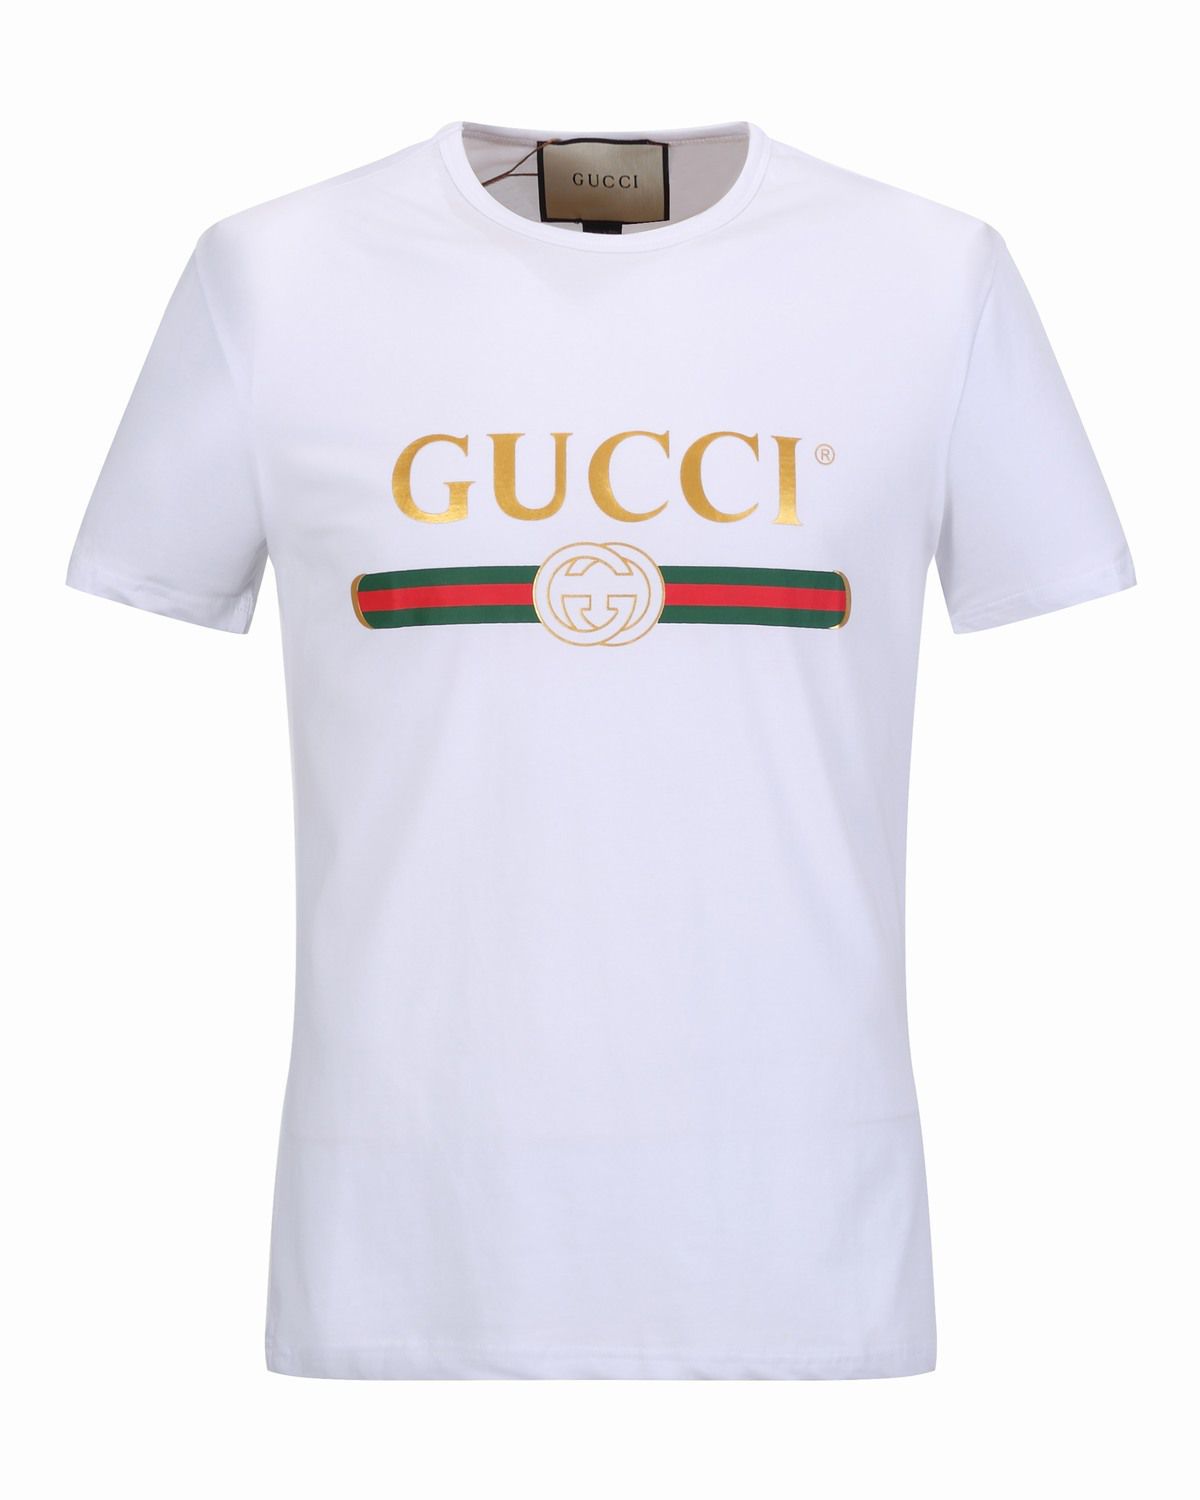 gucci tshirt price in india